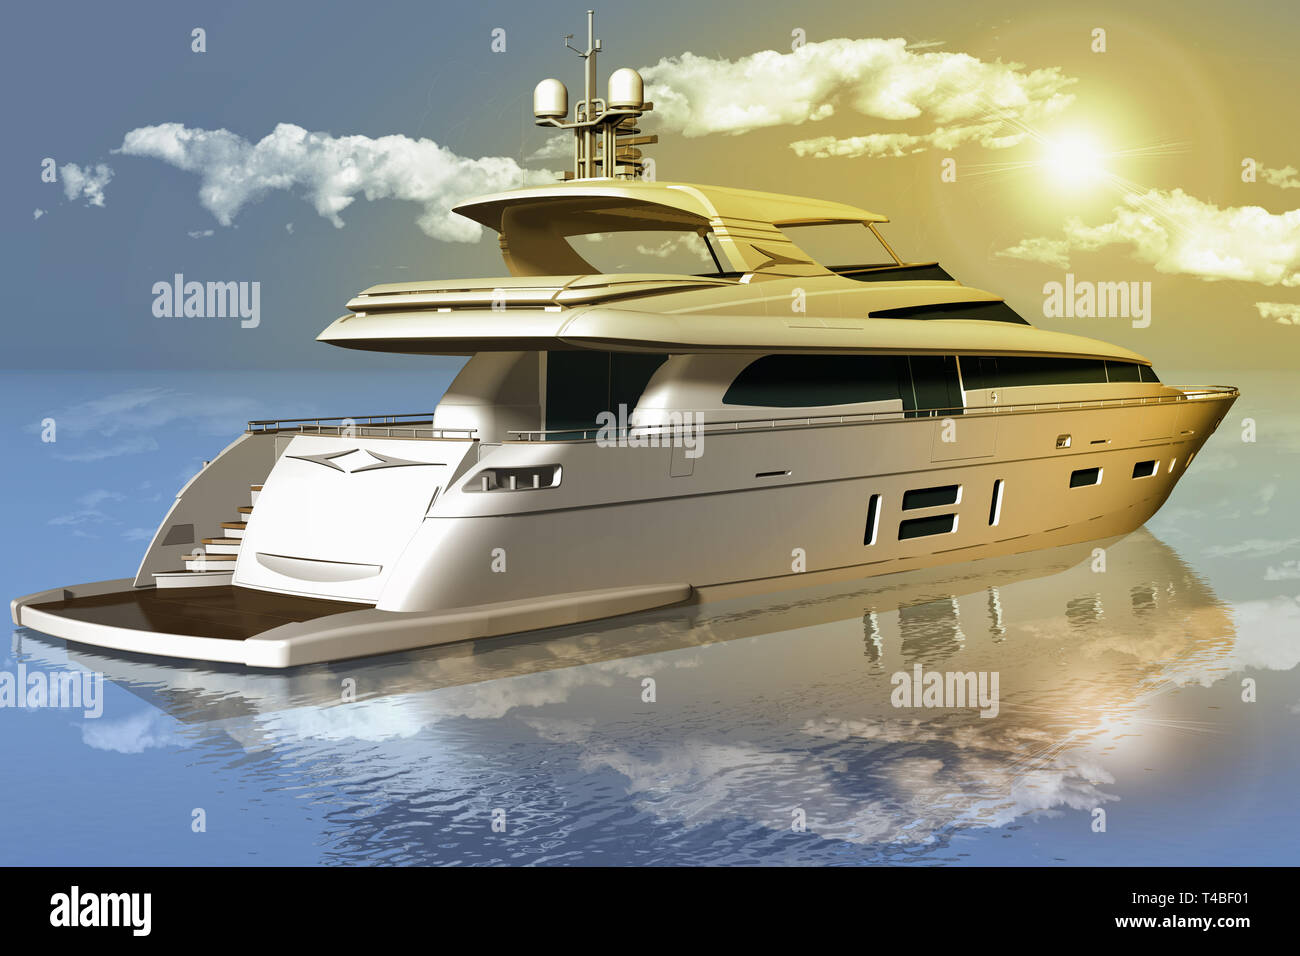 3D illustration. Yacht in the sea with the background of sky, clouds and sun. Stock Photo